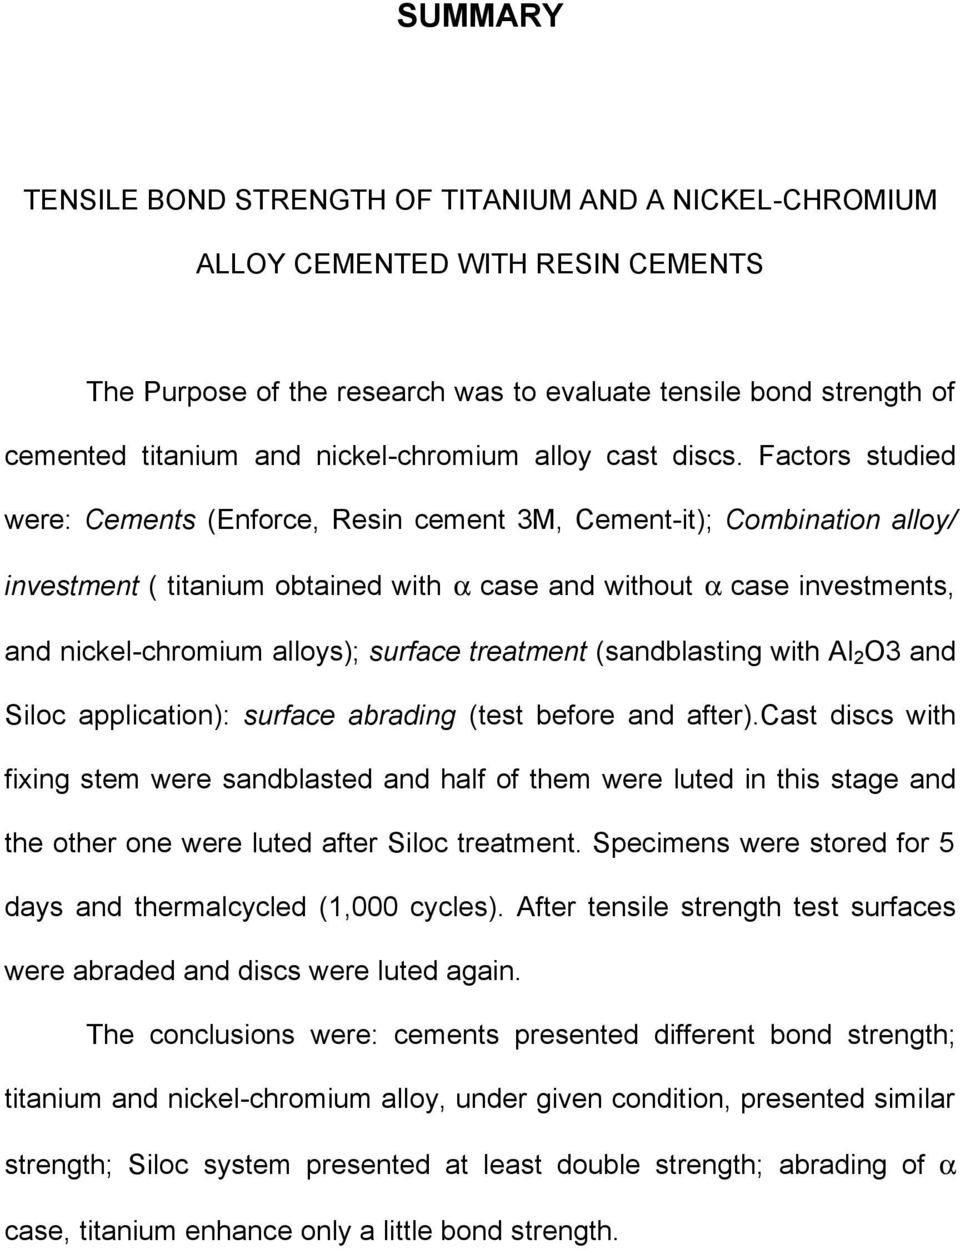 Factors studied were: Cements (Enforce, Resin cement 3M, Cement-it); Combination alloy/ investment ( titanium obtained with α case and without α case investments, and nickel-chromium alloys); surface